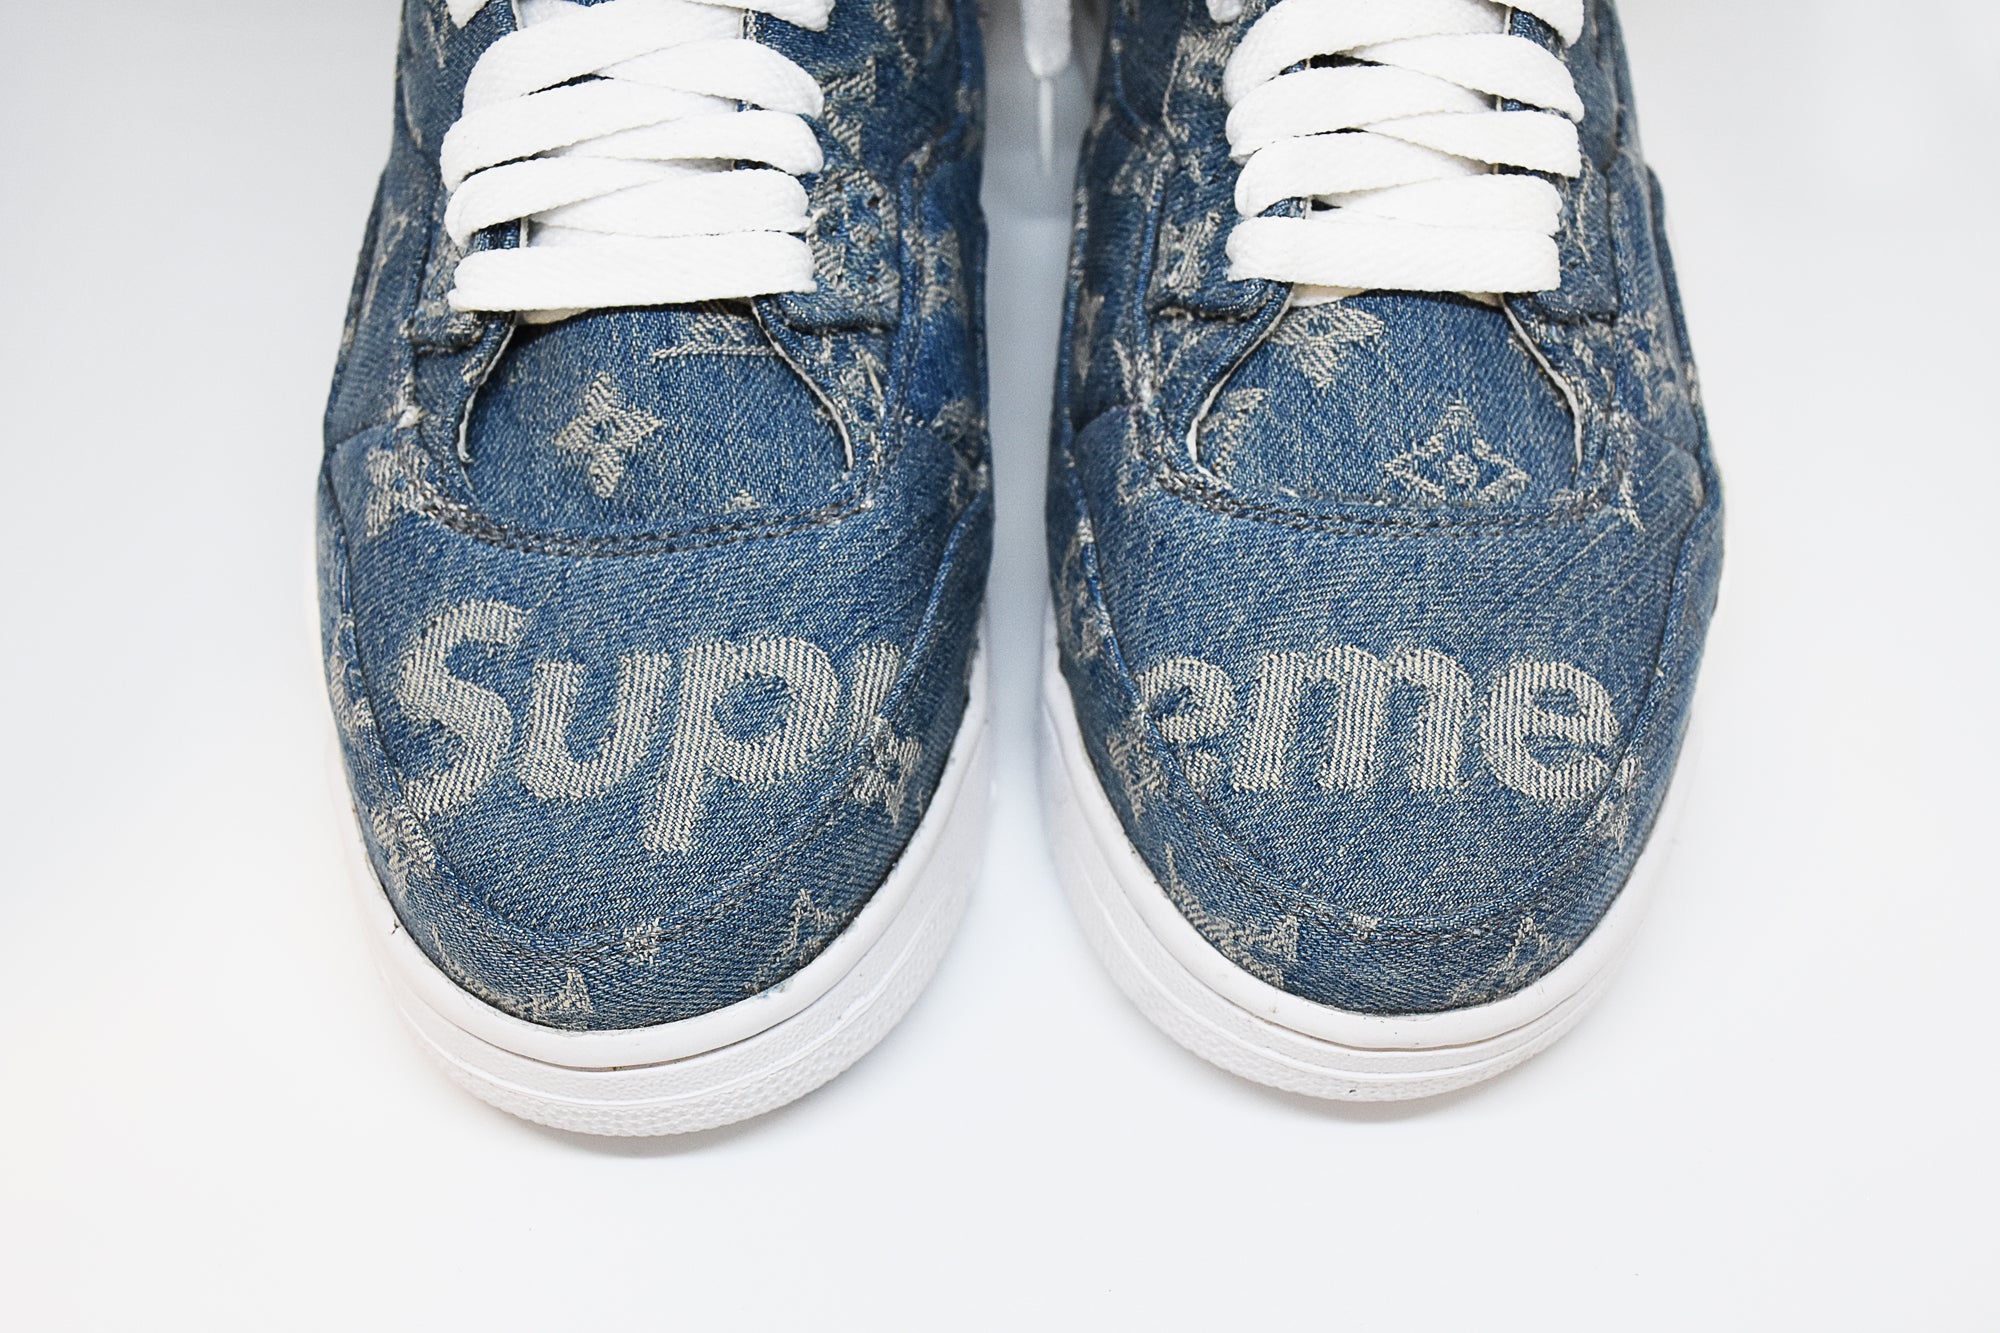 Supreme x Louis Vuitton denim covers @jbfcustoms' latest set of Air Jordan  1s. Visit NiceKicks.com to find out how you can p…